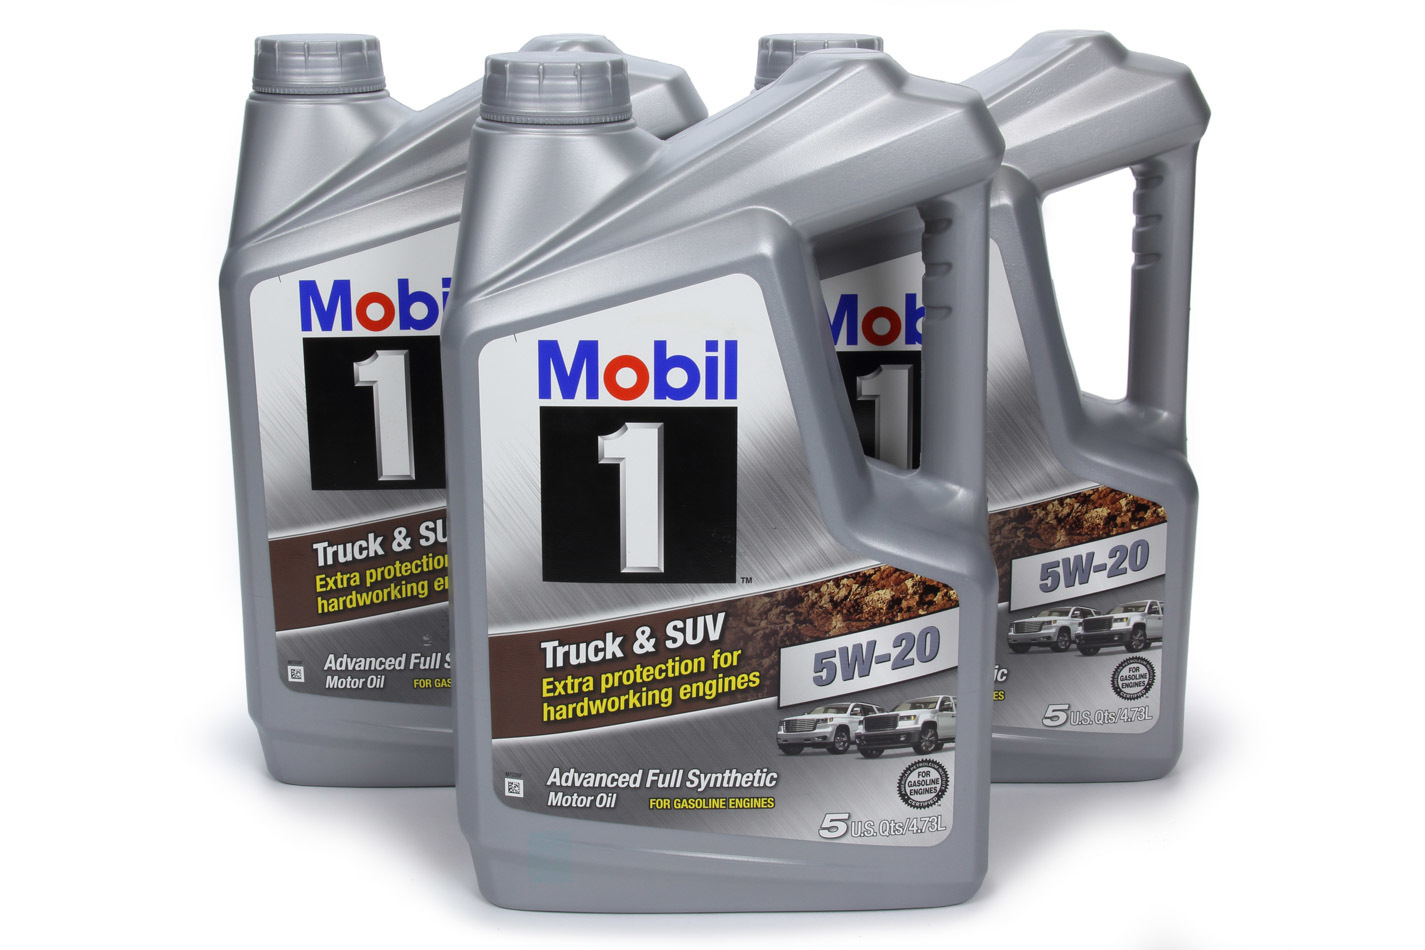 MOBIL 1 Motor Oil Truck and SUV 5W20 Synthetic 5 qt Jug Set of 3